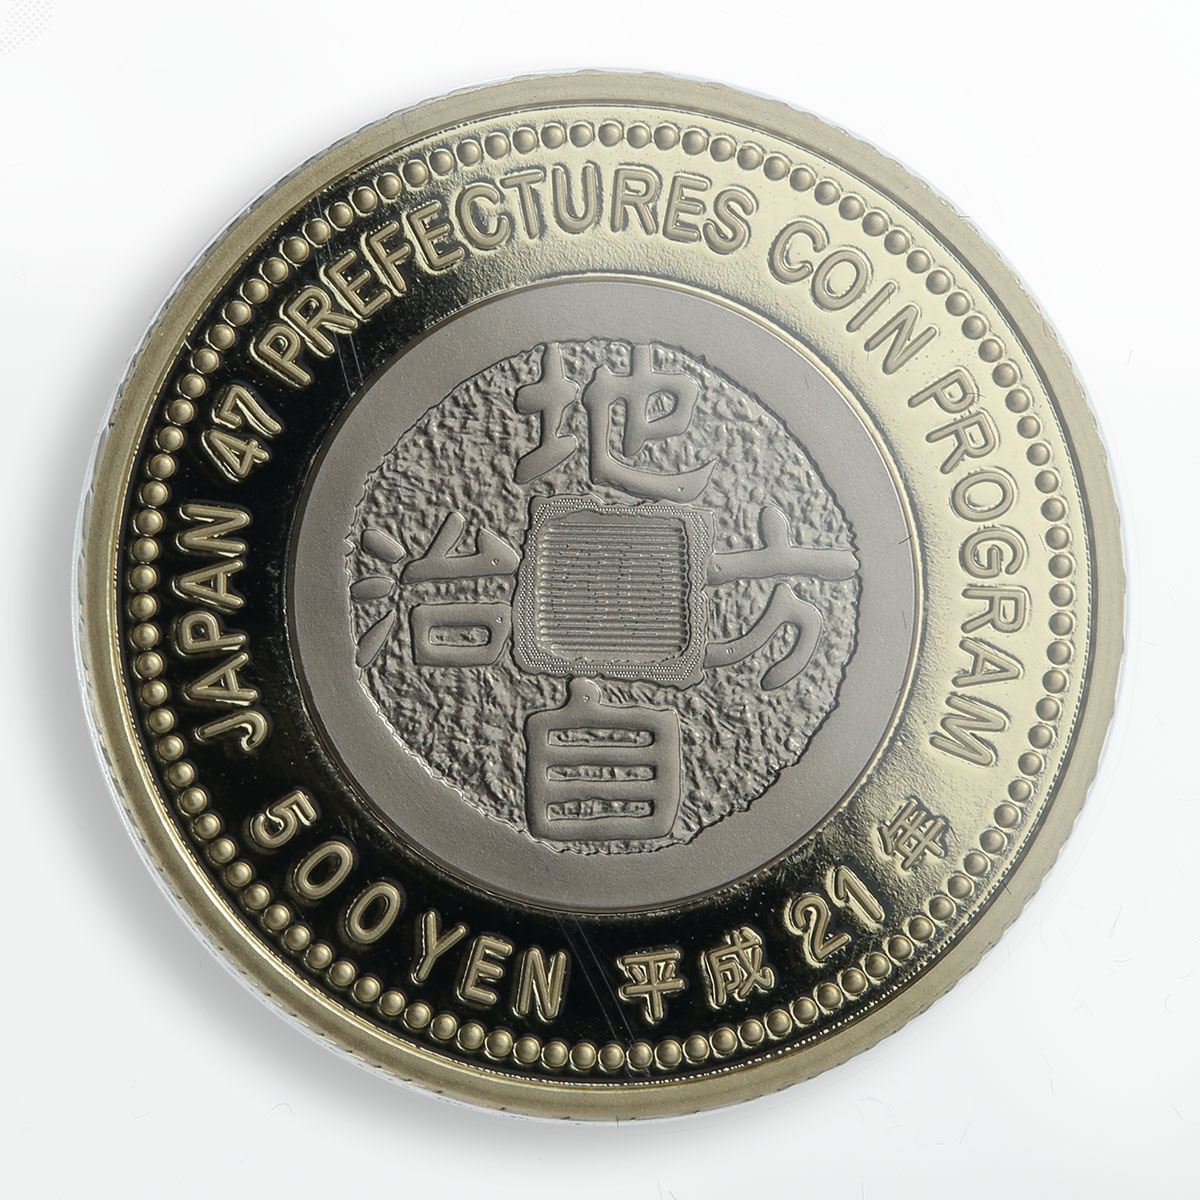 Japan 500 yen 60th of local autunomy law Nagano copper-nickel coin 2009